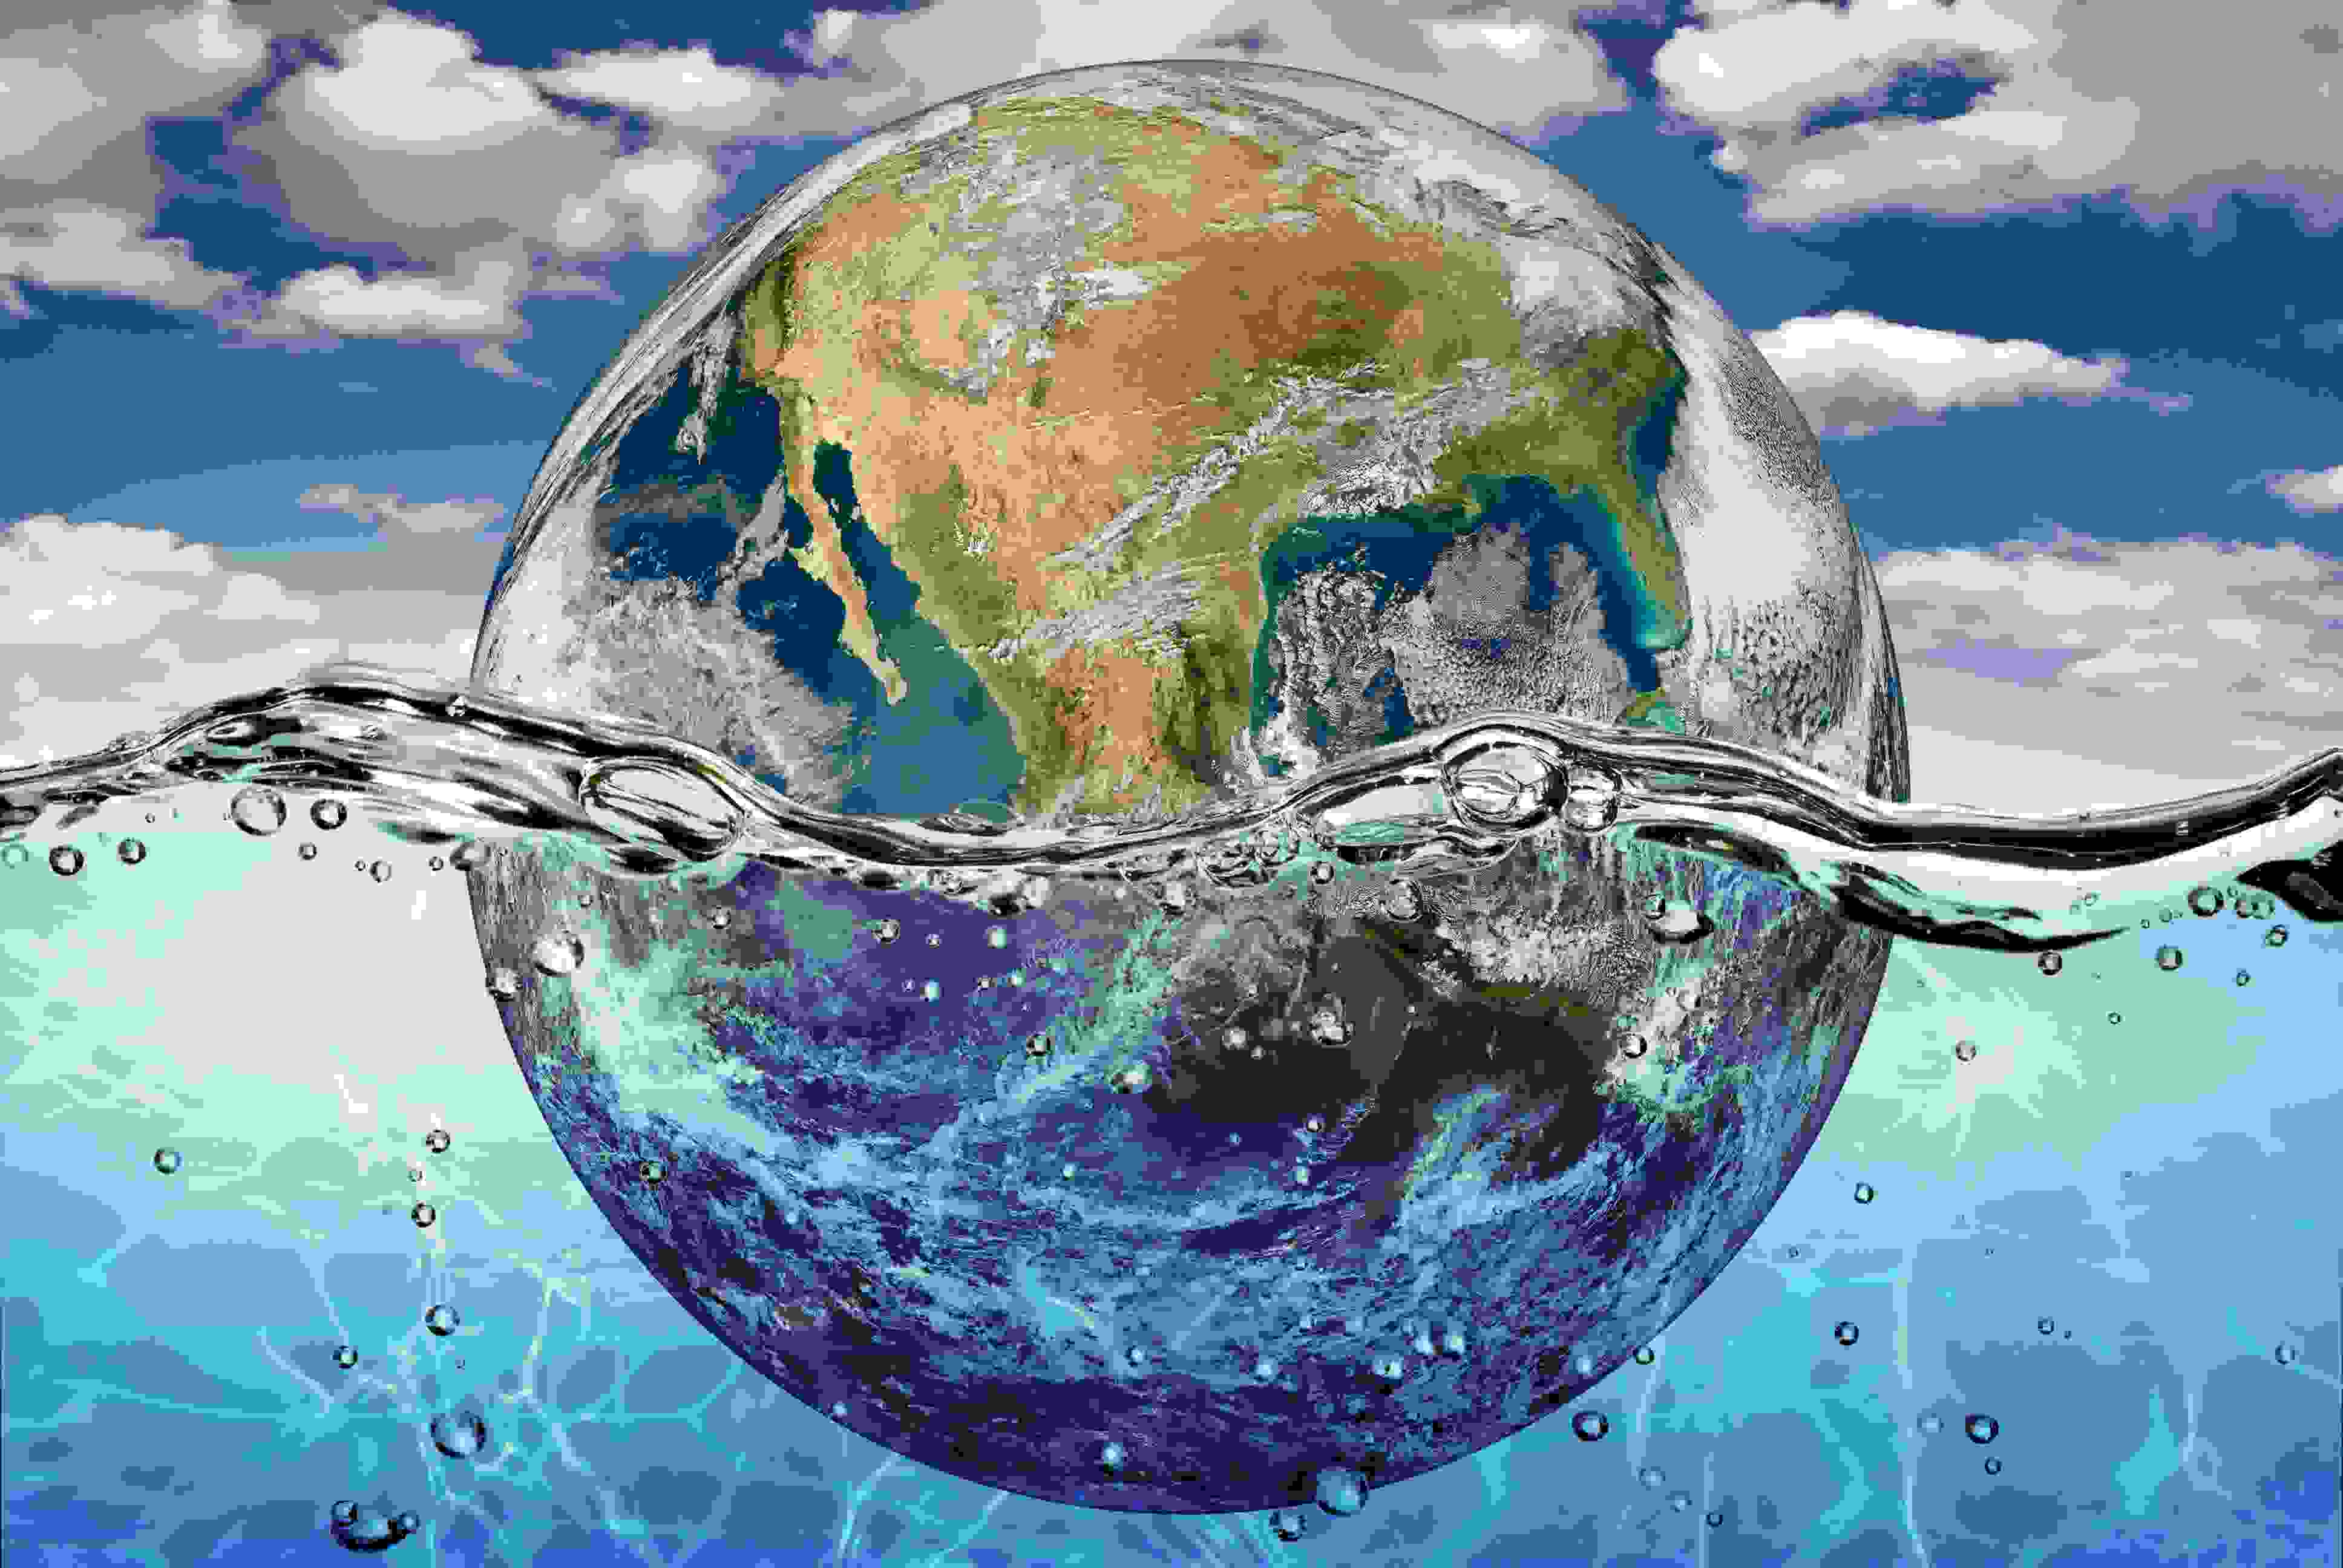 Storms, Saltwater, Sewage and Air: Finding Freshwater in a Changing World